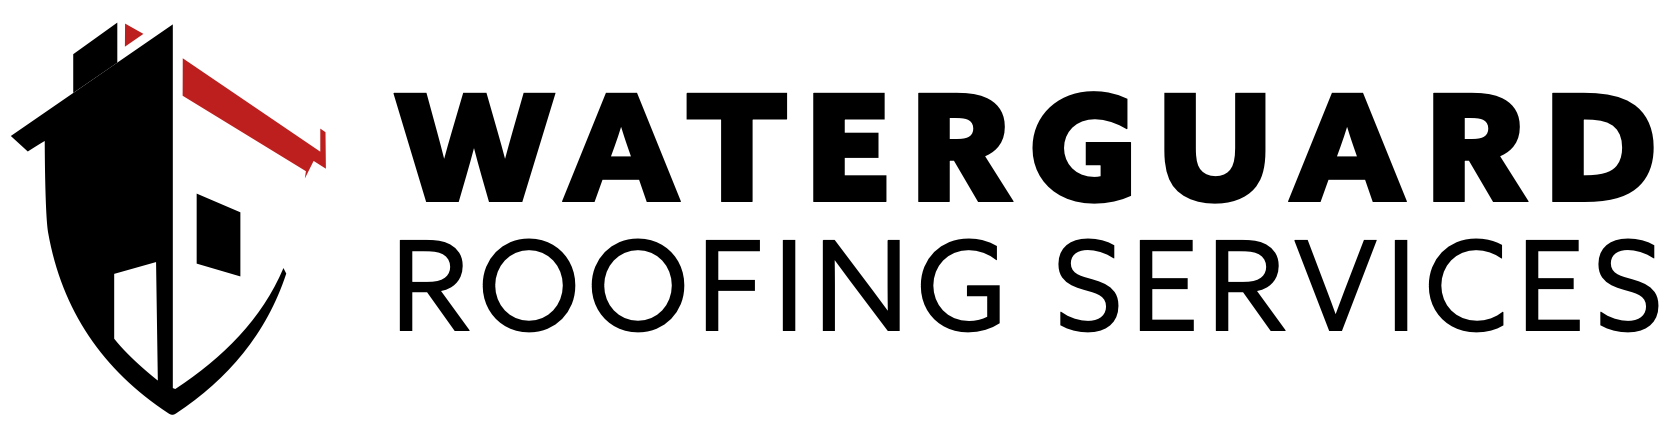 WaterGuard Roofing Services Logo